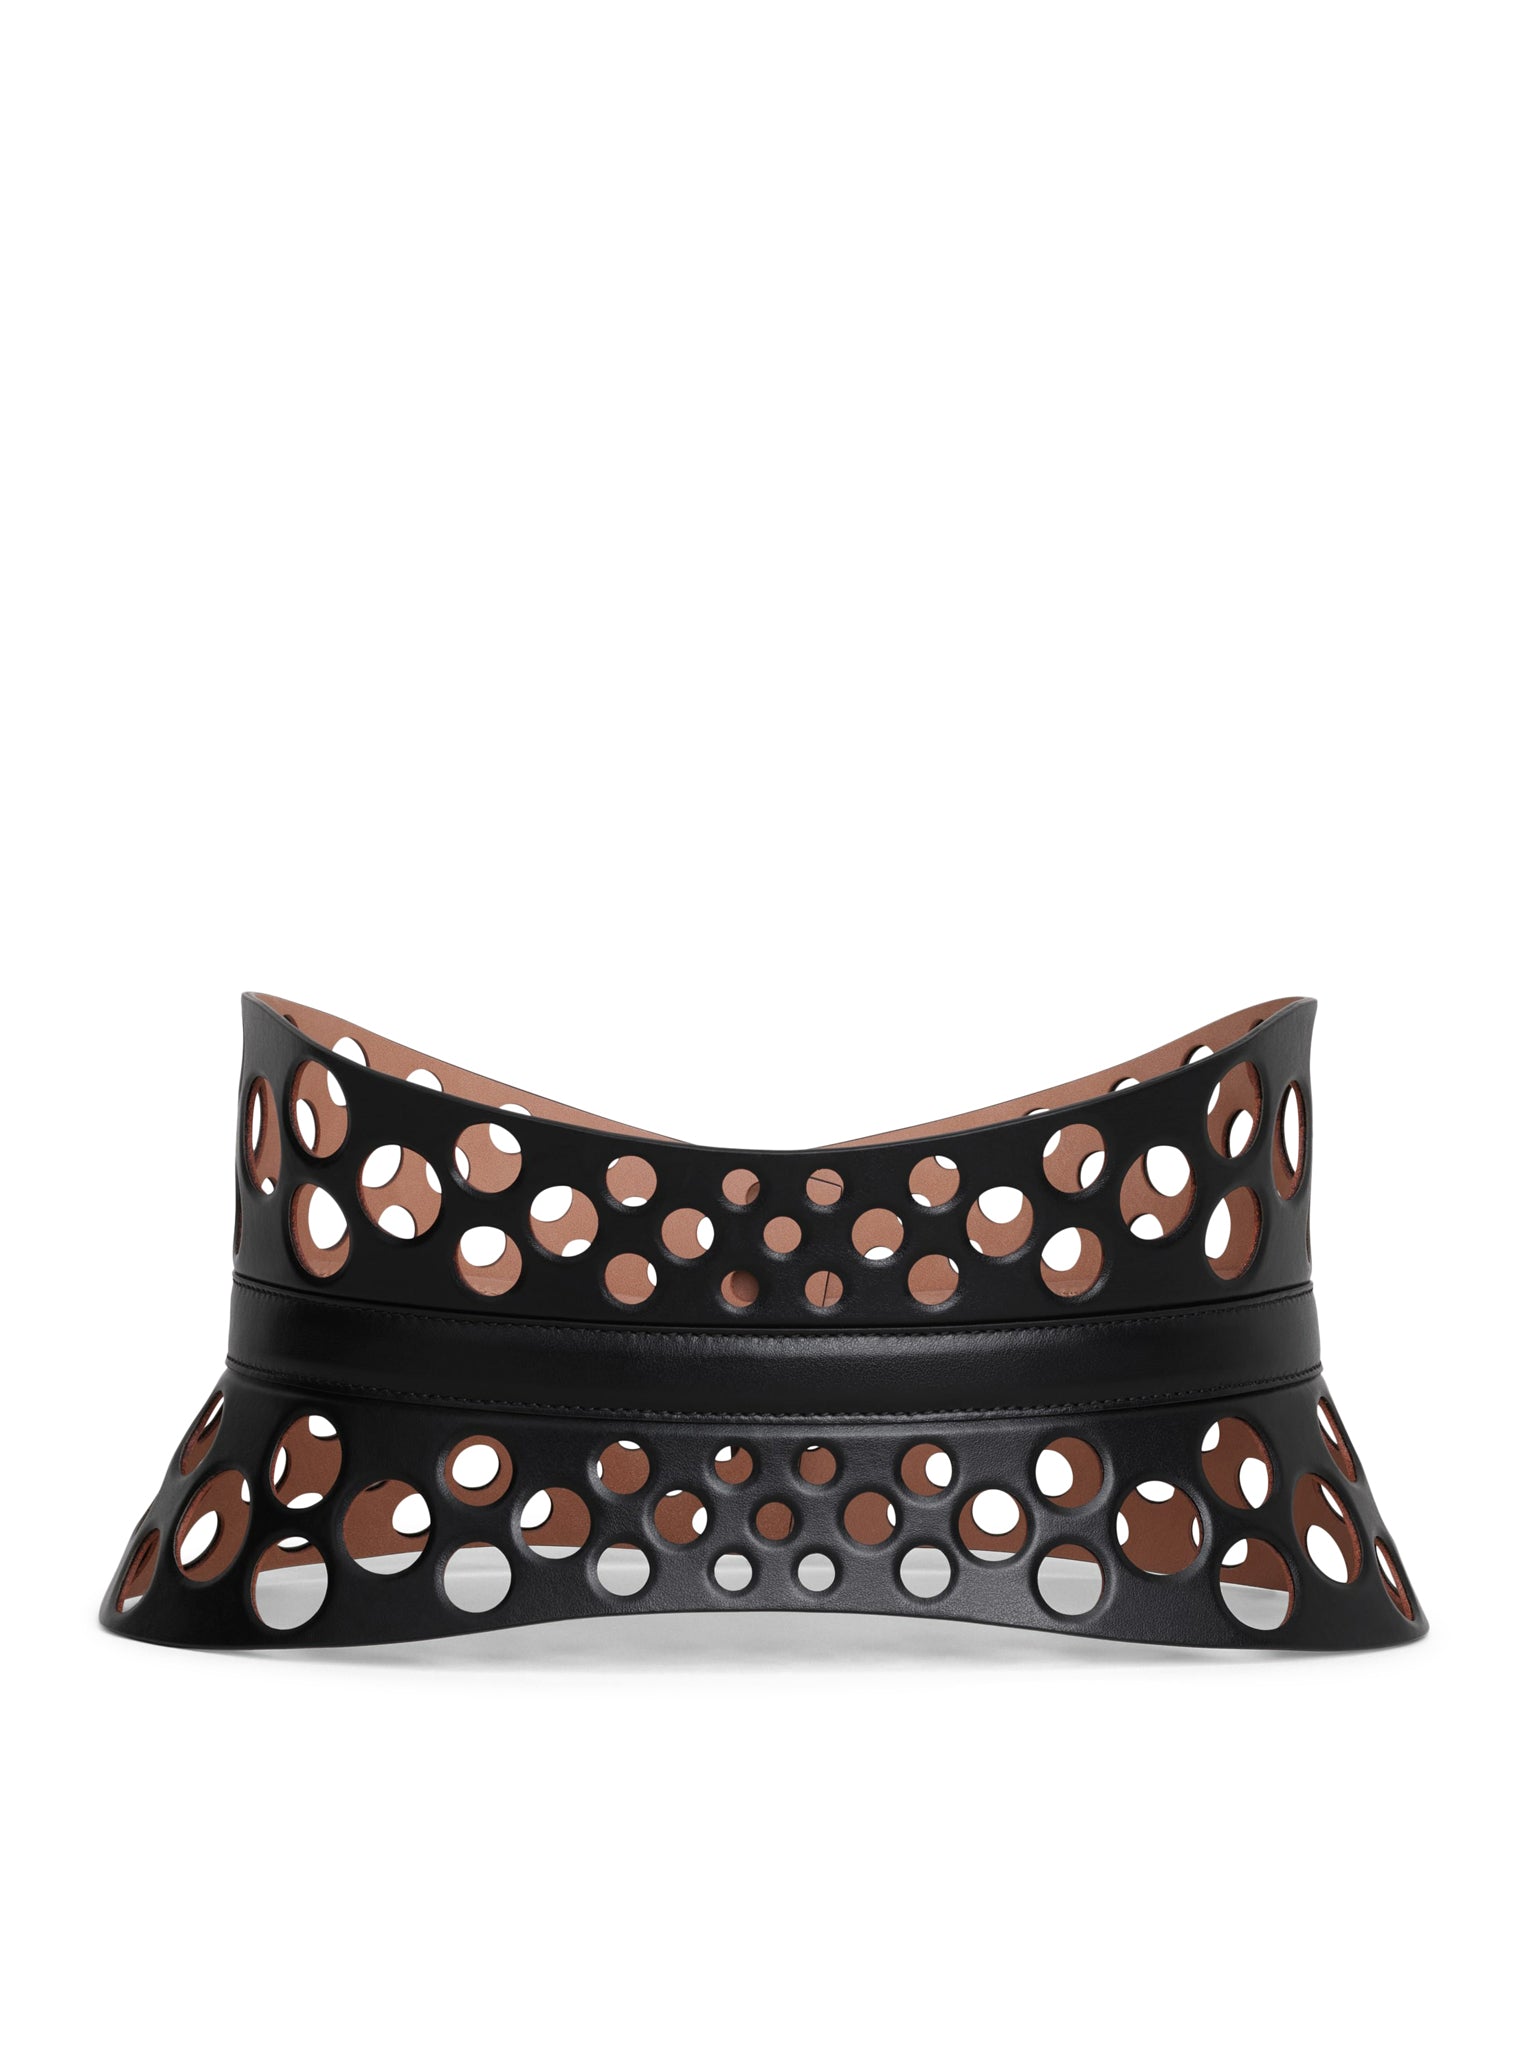 NEO BUSTIER BELT IN PERFORATED CALF LEATHER